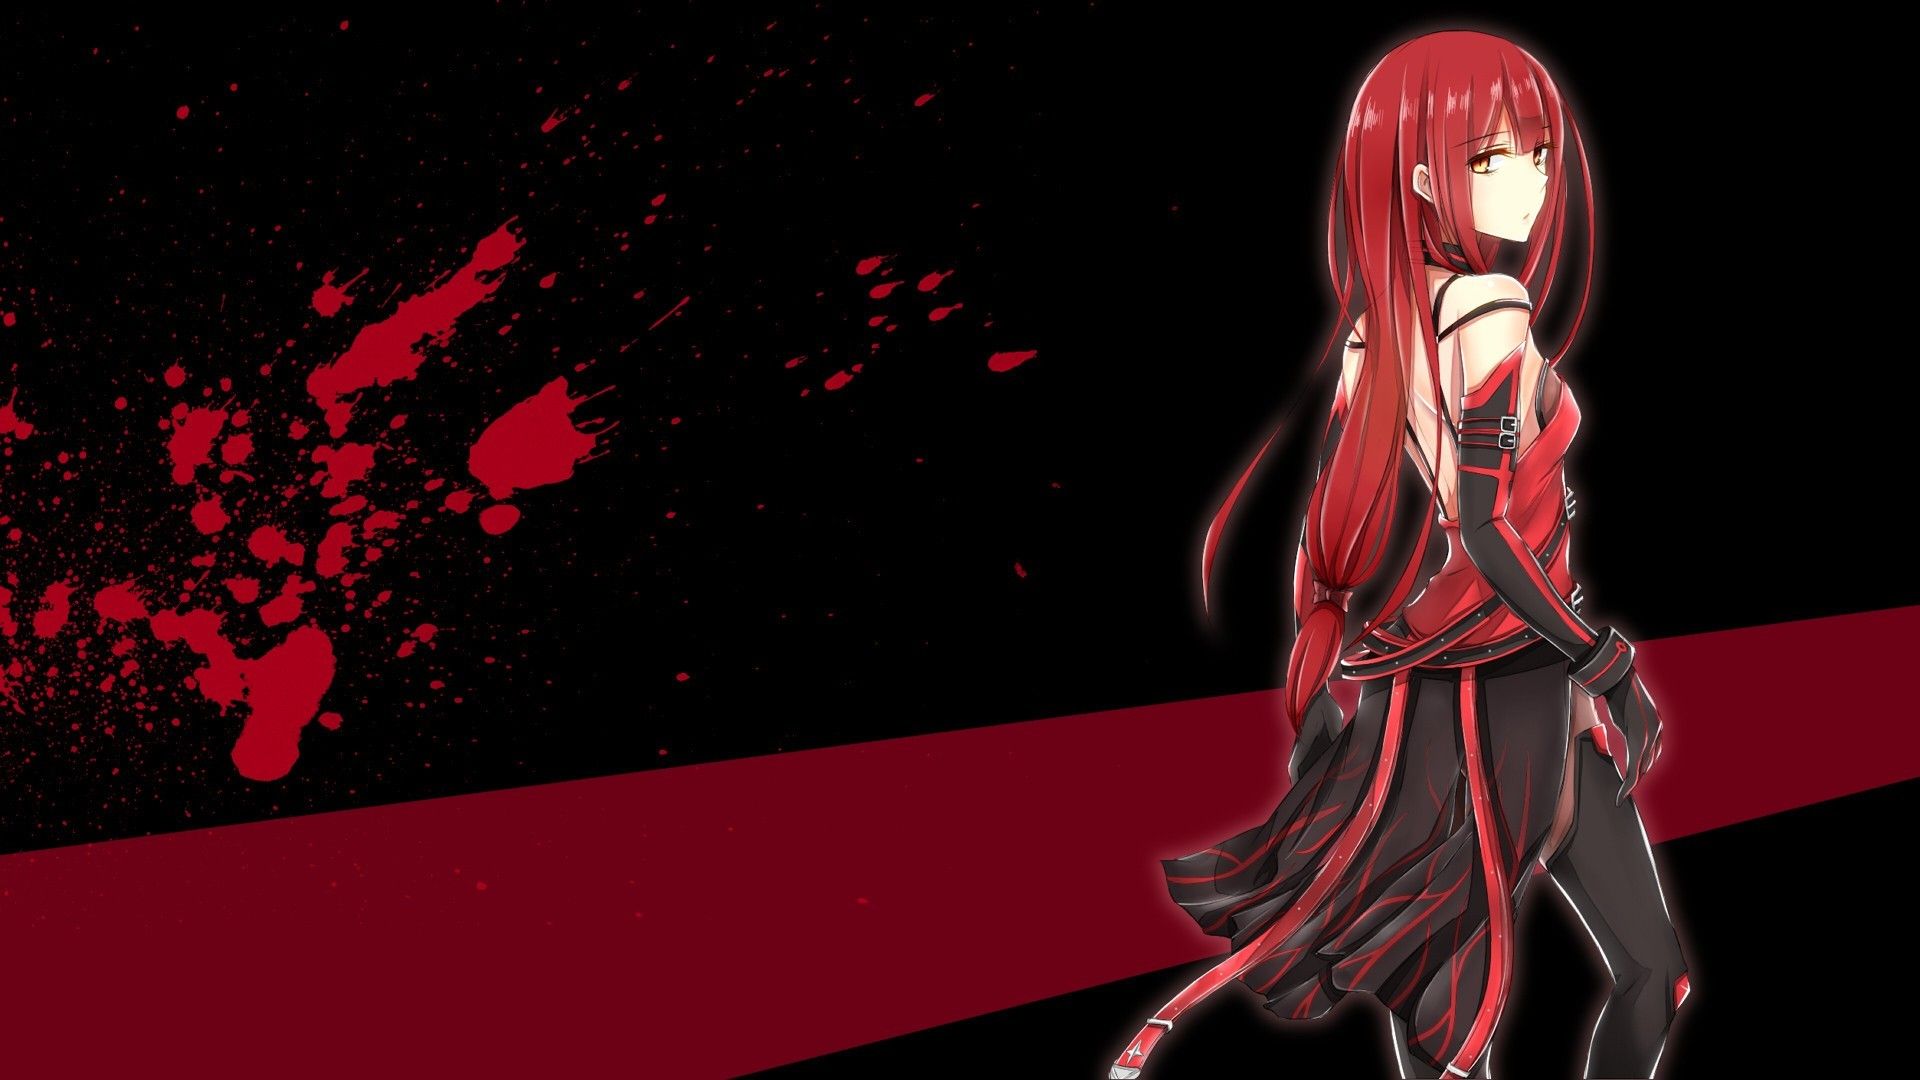 Dark Red Anime Wallpapers